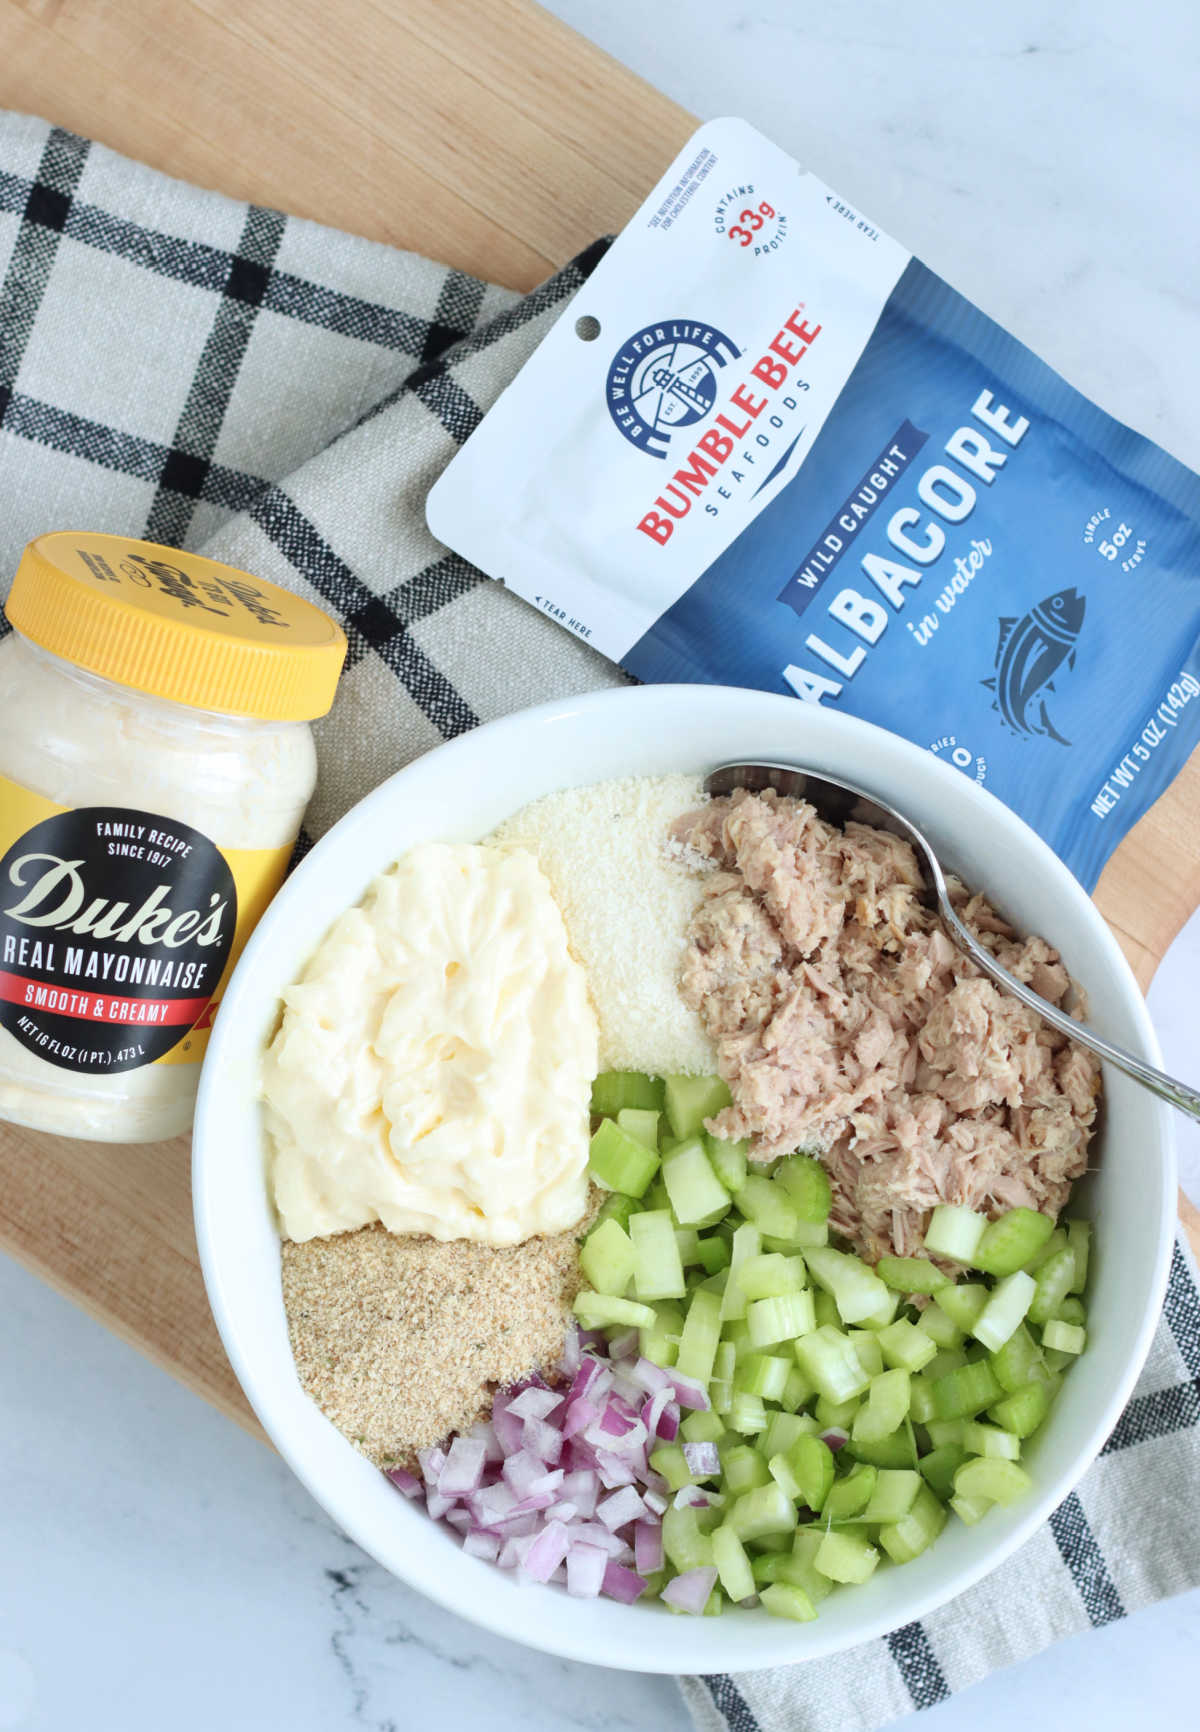 Small white bowl with ingredients for tuna salad, packet of tuna, mayonnaise jar on wooden cutting board.